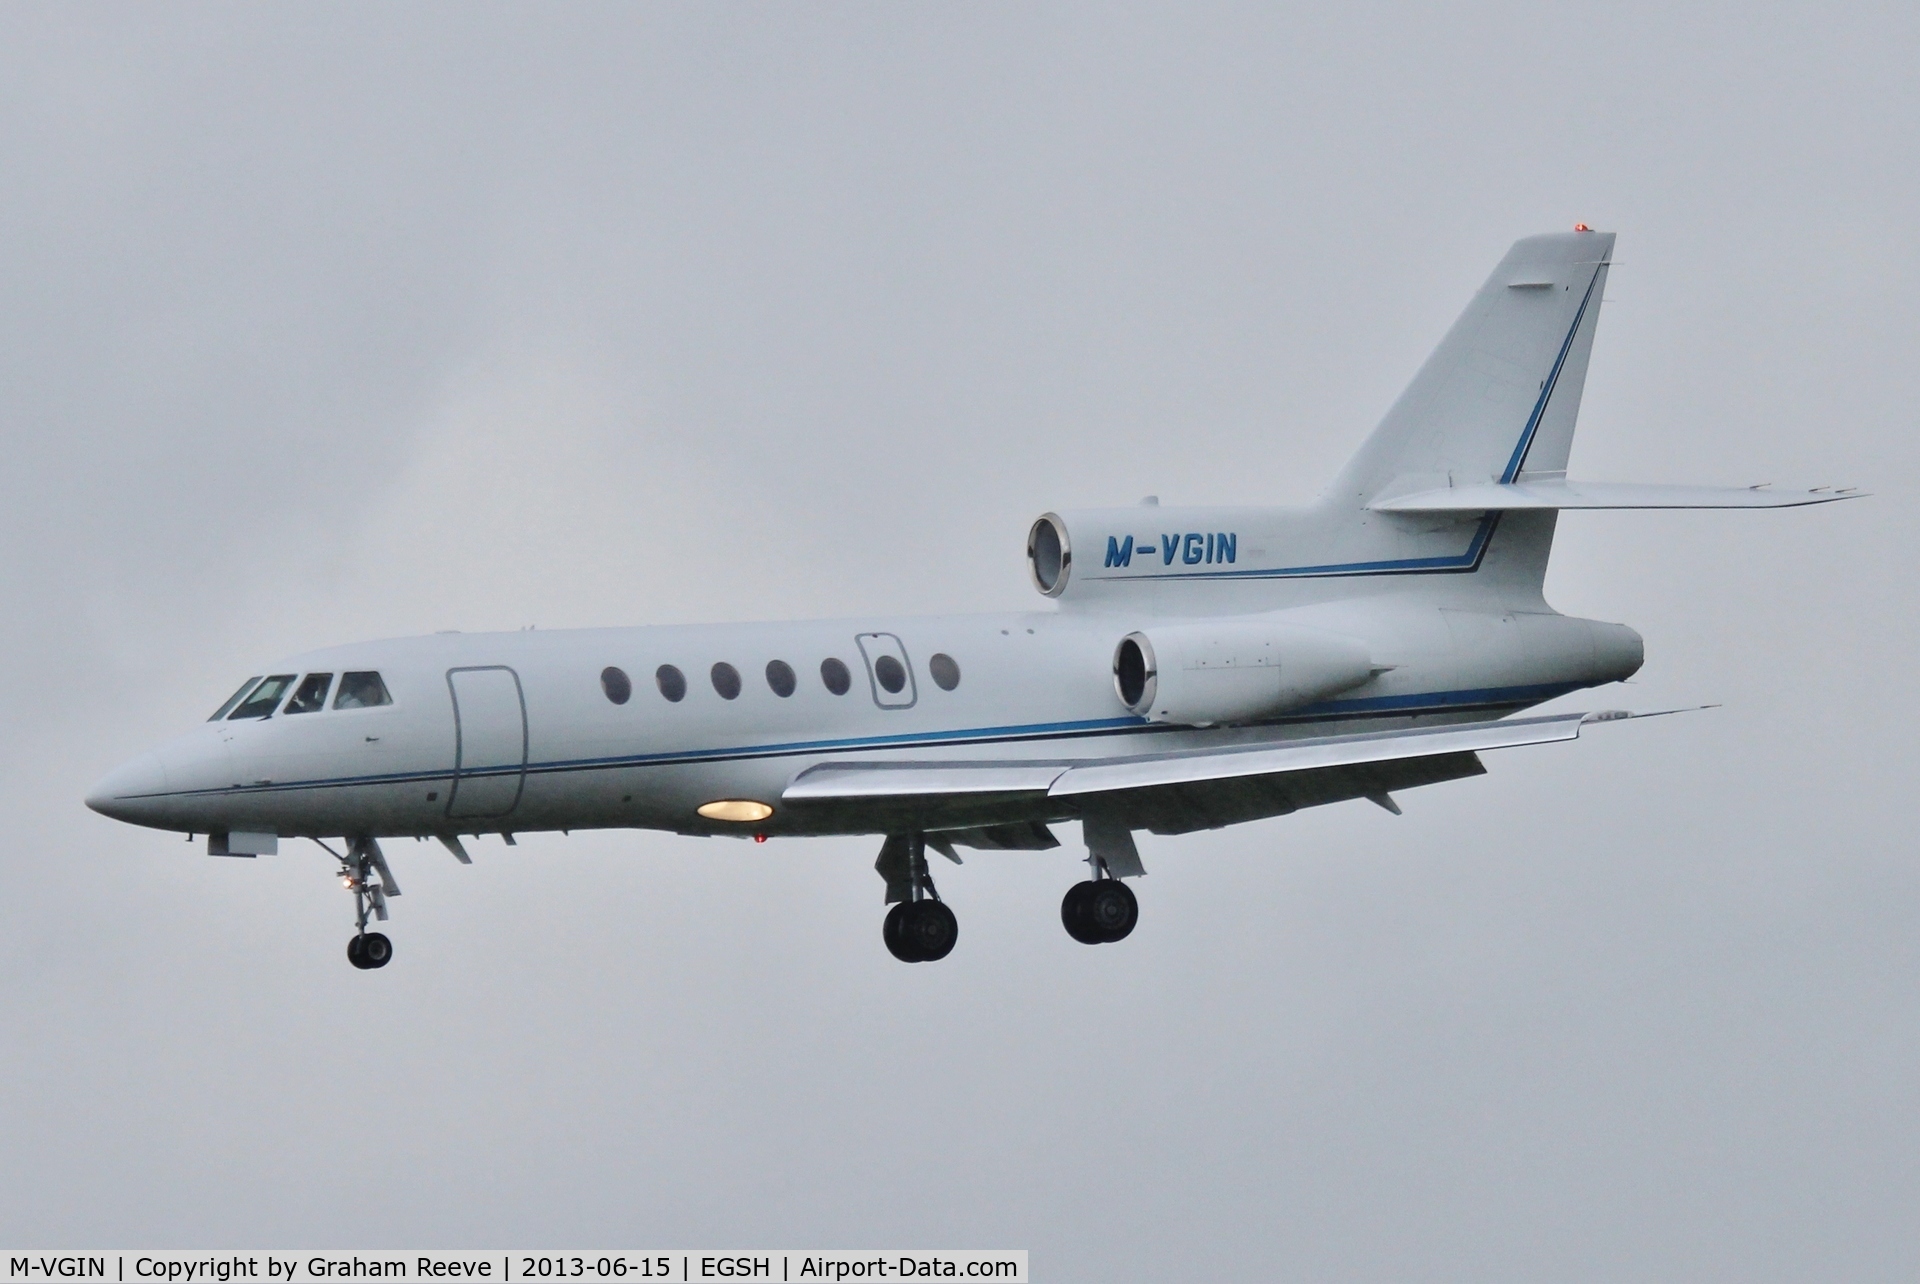 M-VGIN, 2001 Dassault Falcon 50EX C/N 320, About to land in heavy rain at Norwich.